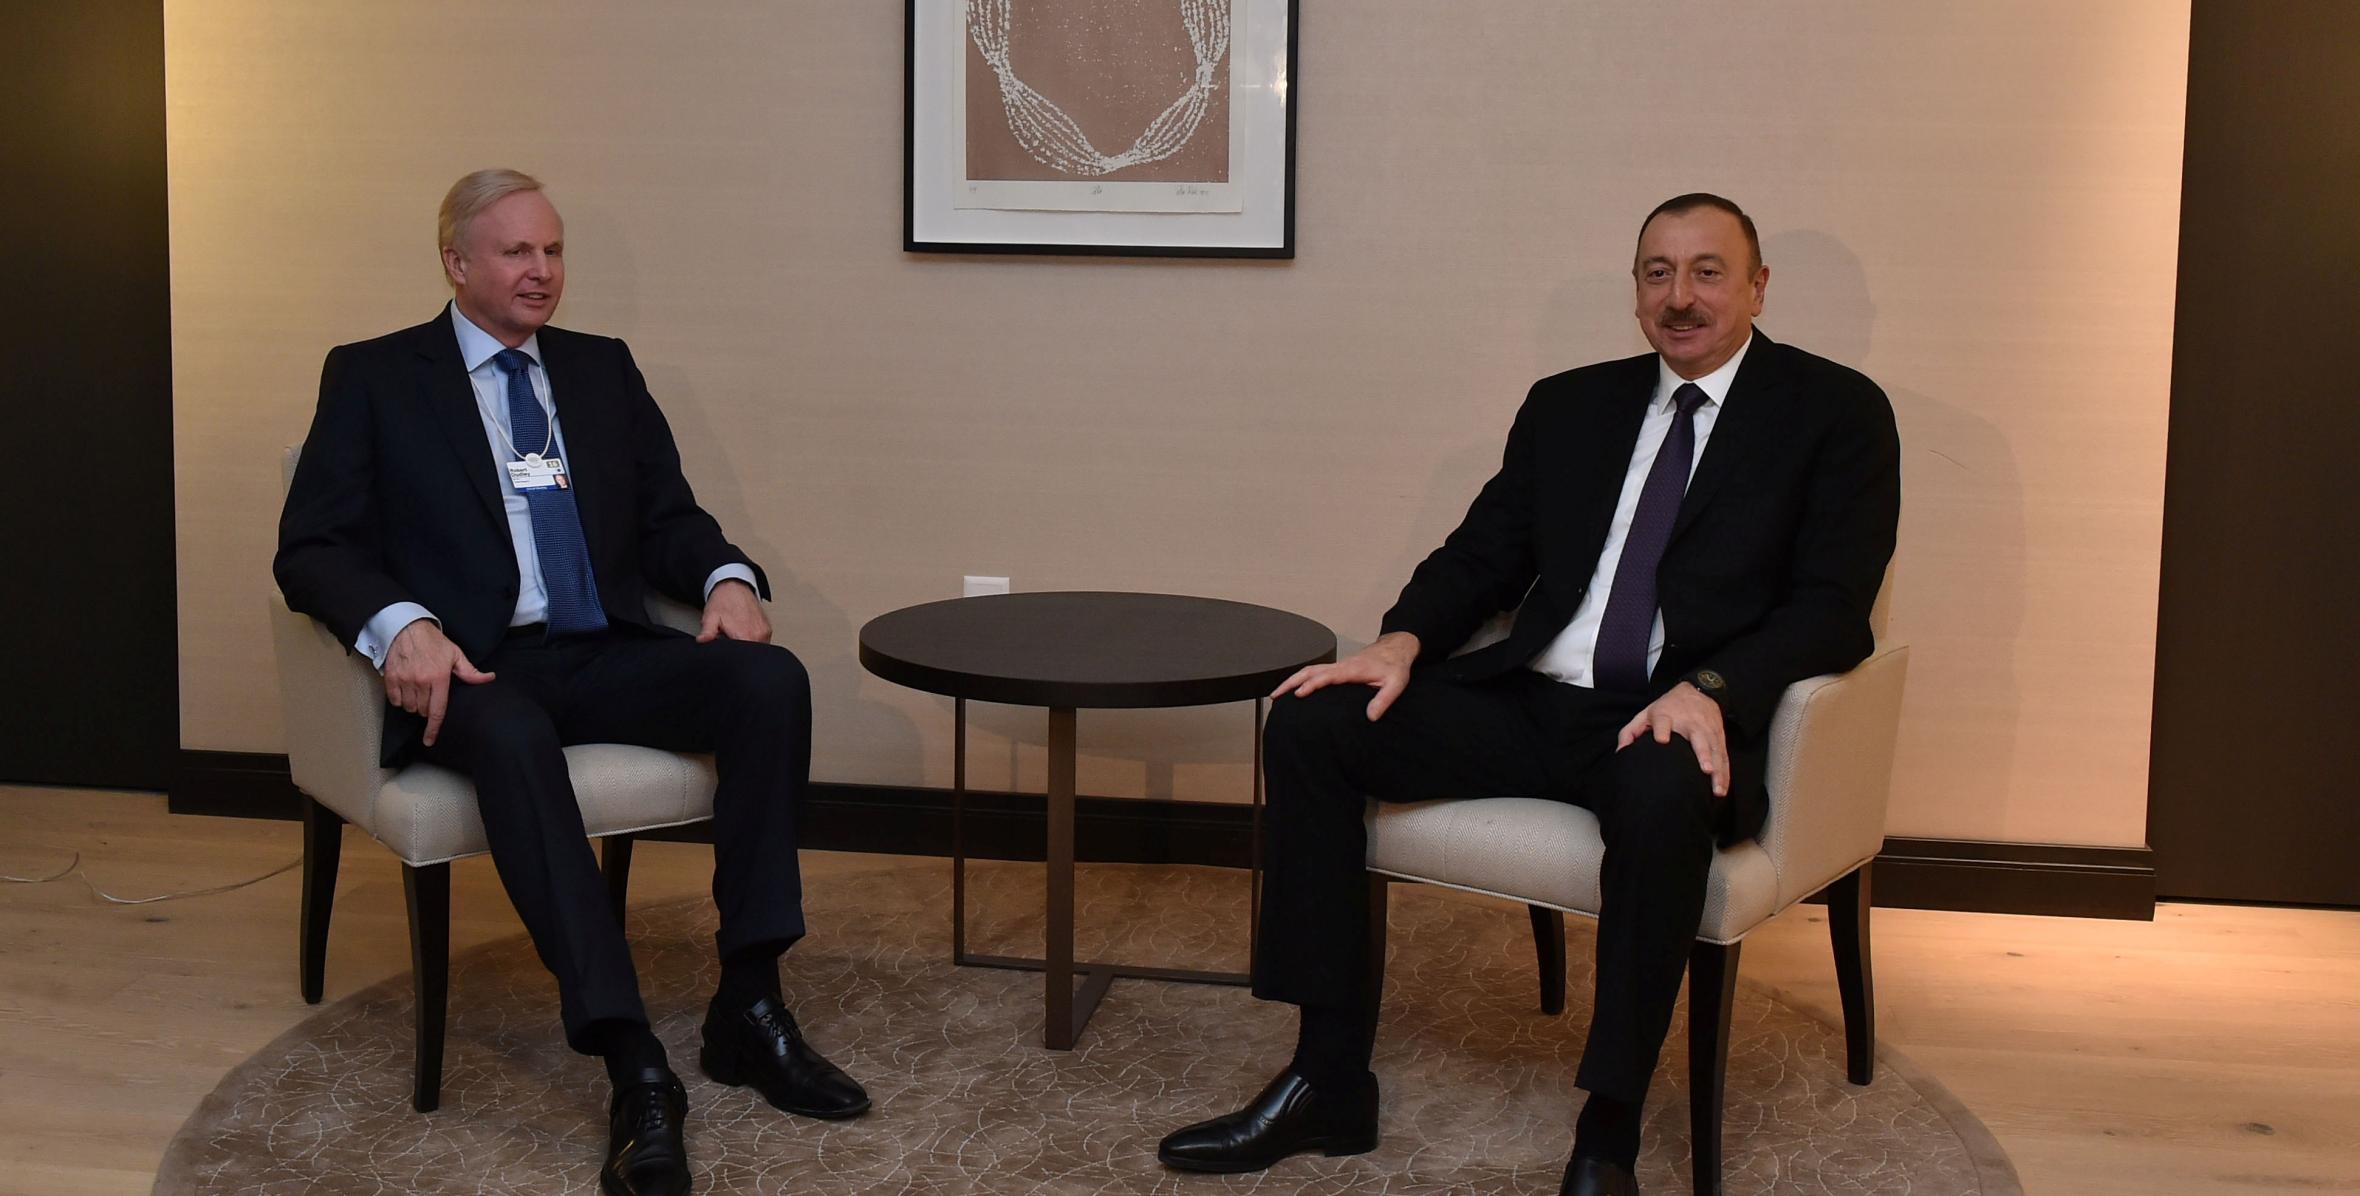 Ilham Aliyev met with BP Chief Executive Officer